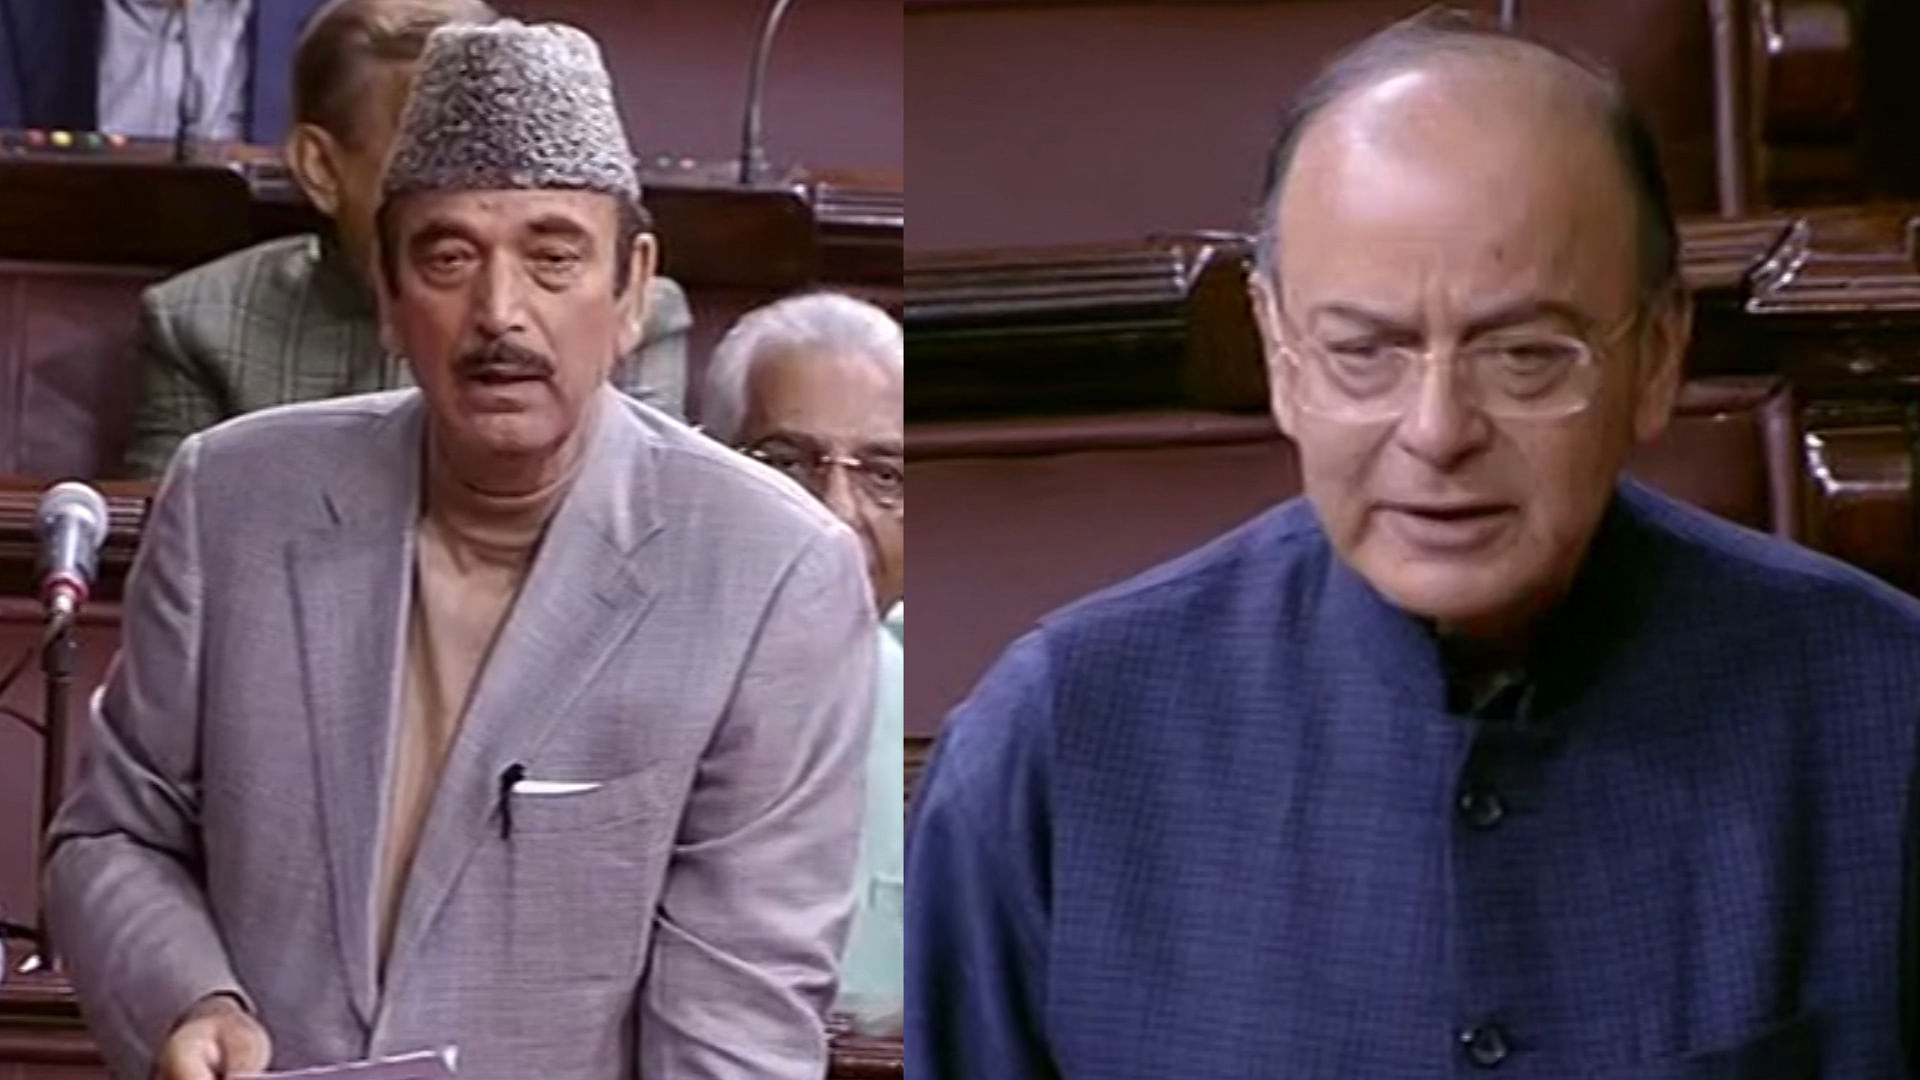 Finance Minister Arun Jaitley and Congress&nbsp; leader Ghulam Nabi Azad&nbsp; issued clarifications in the Rajya Sabha over remarks made against each other during the Gujarat polls.